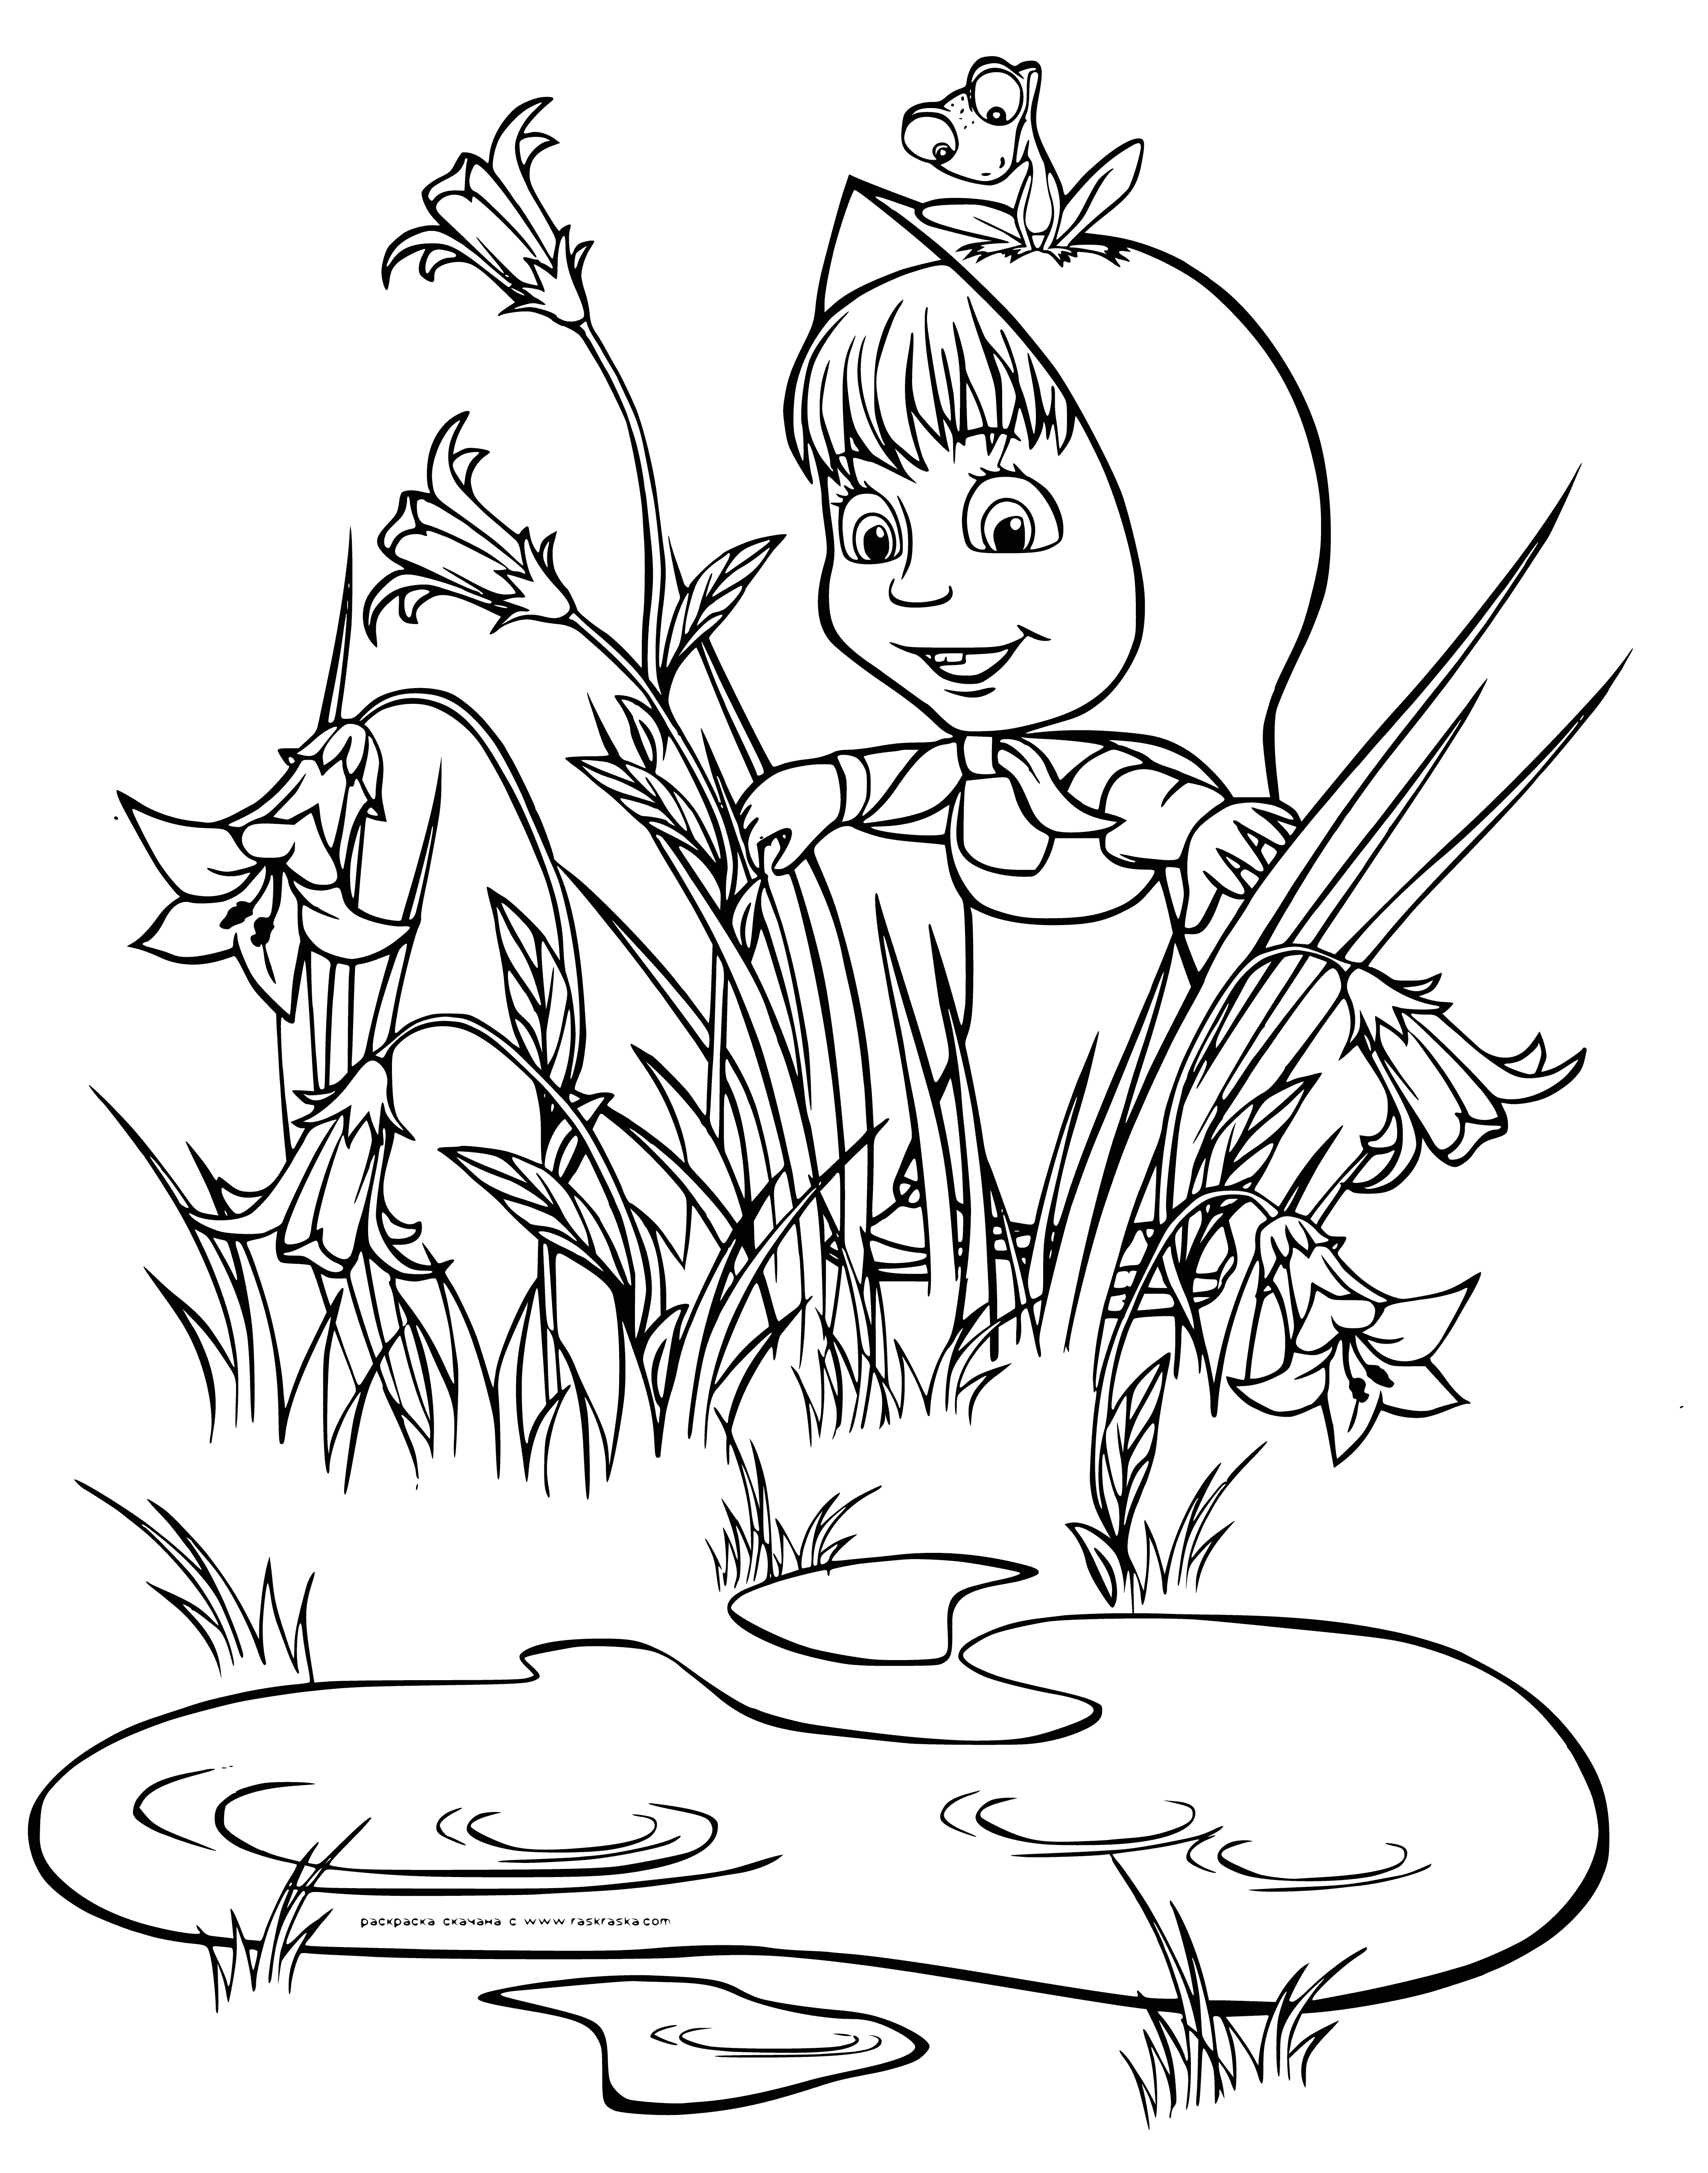 coloring page: Little girl in yellow coat and blue scarf peeks into large pot while brown bear stands nearby, spoon in hand.